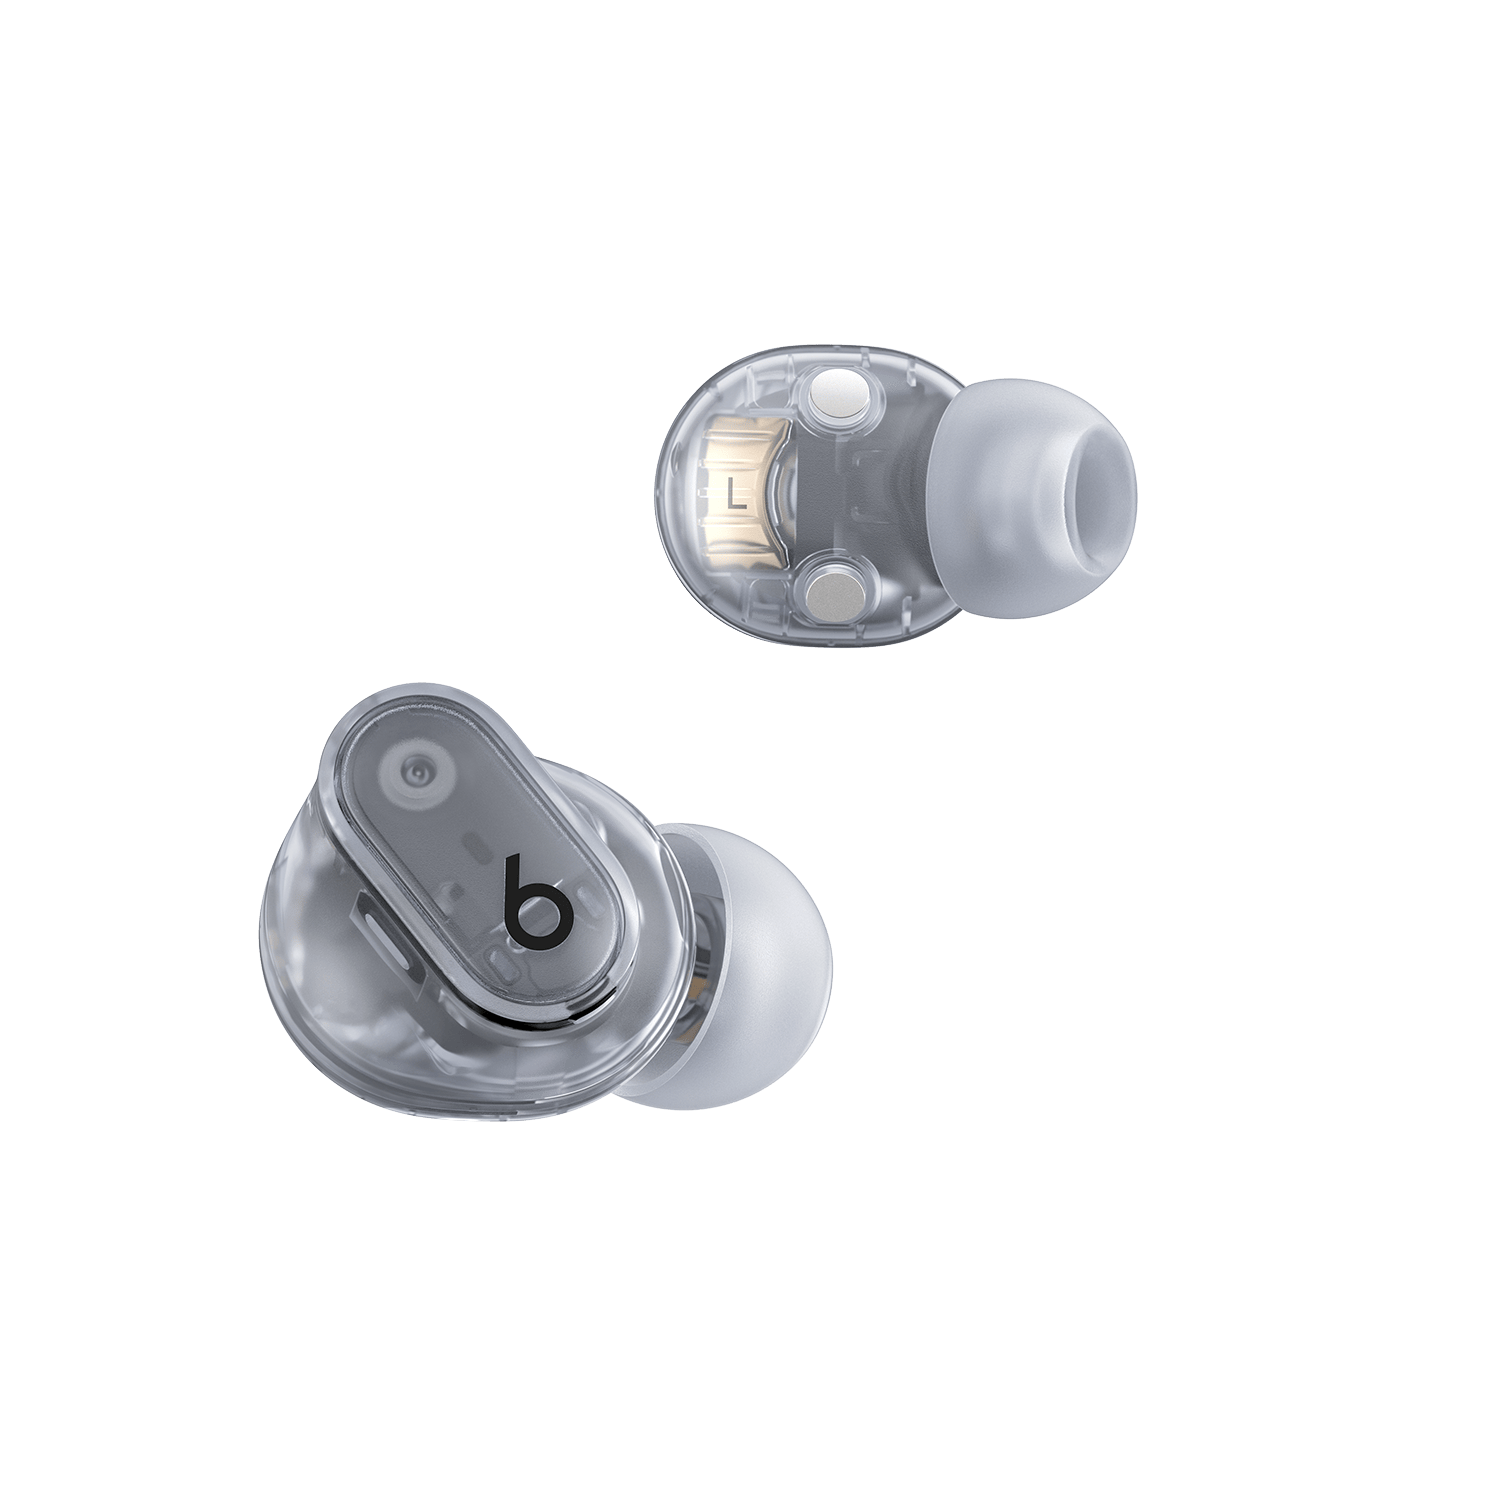 Beats Studio Buds + - True Wireless Noise Cancelling Earbuds - Transparent  אייקון